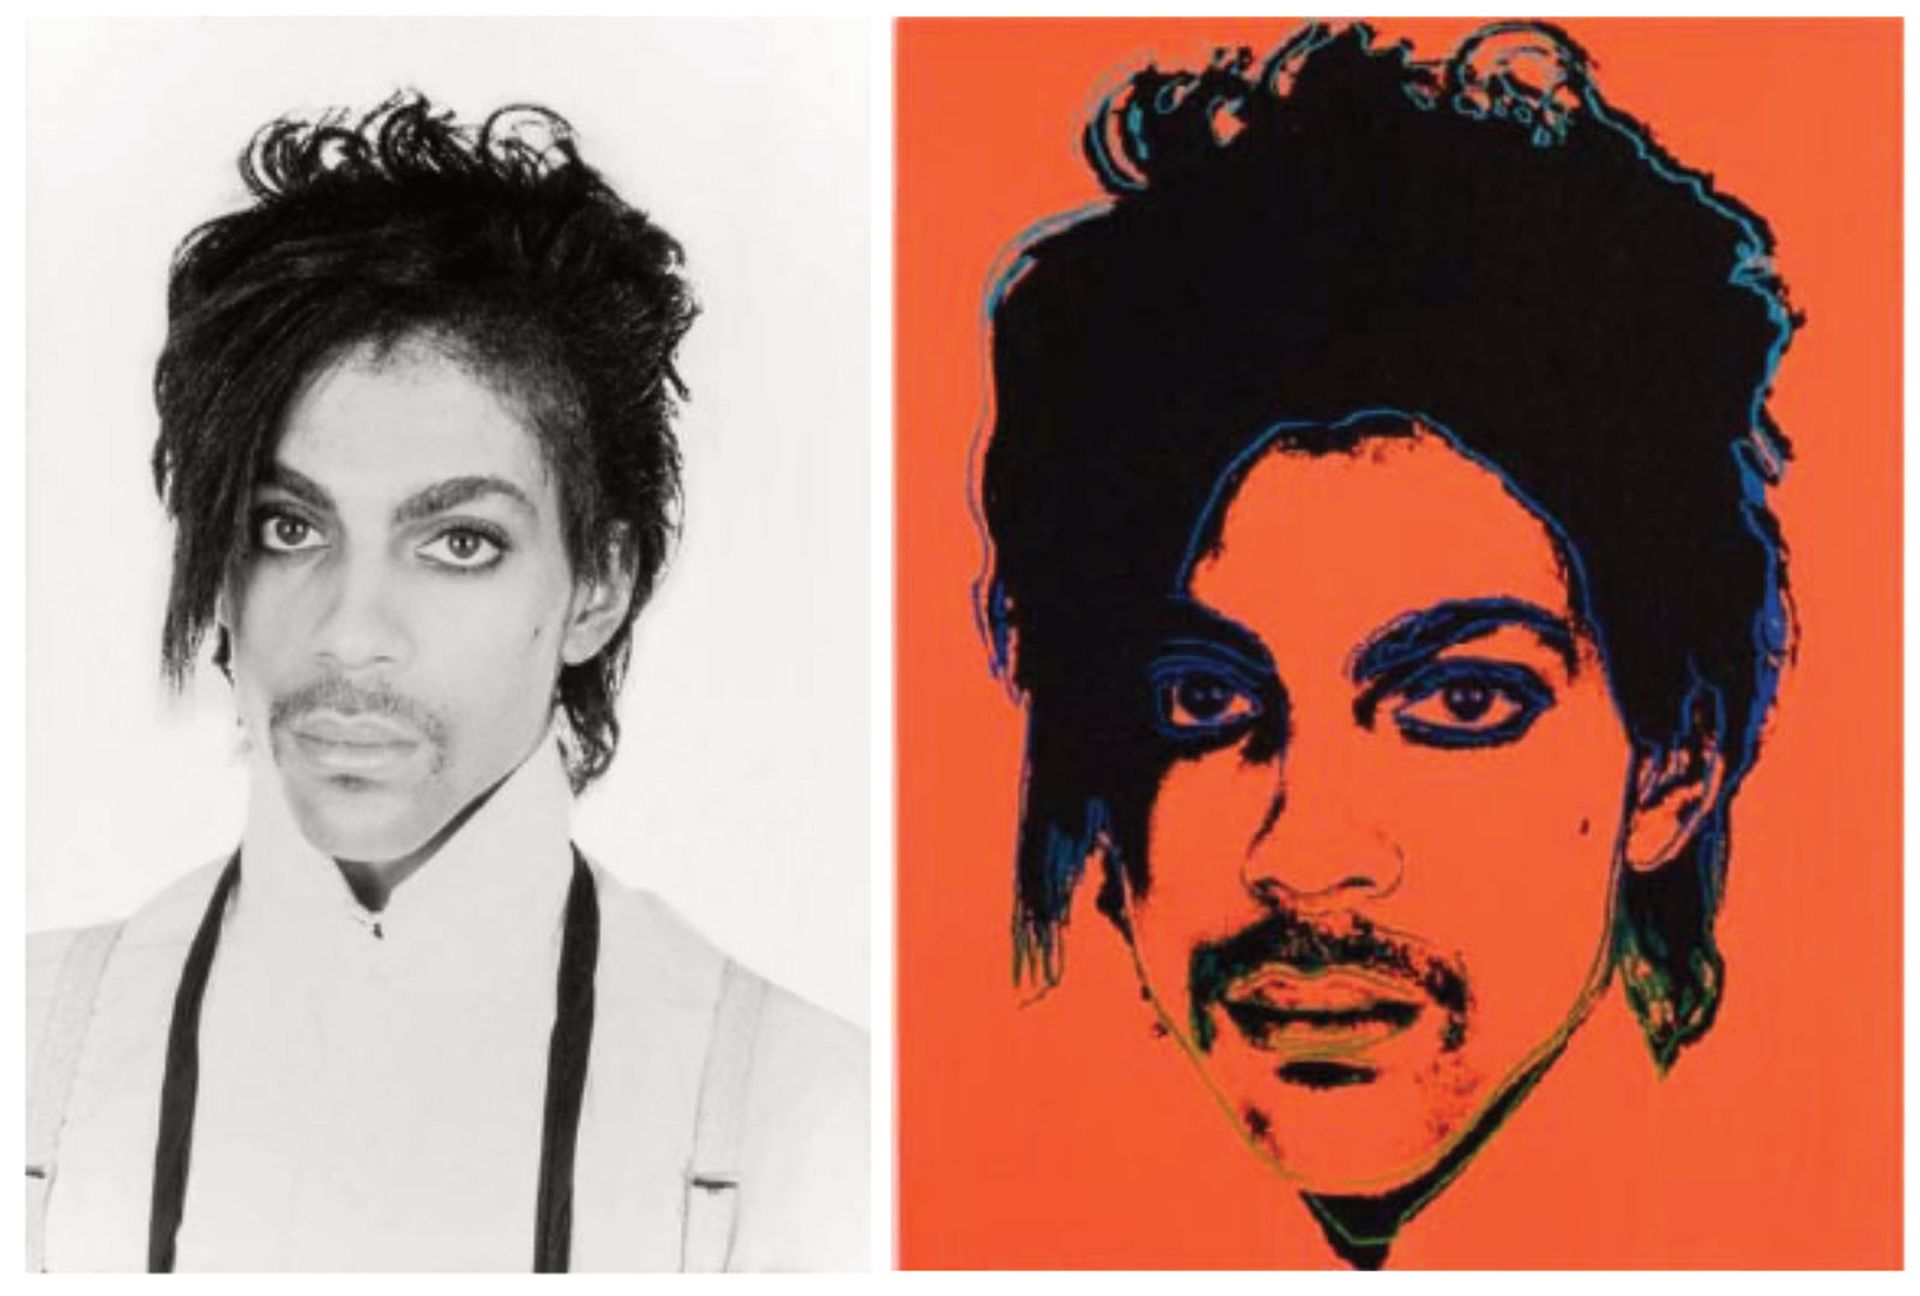 Left: Lynn Goldsmith’s 1981 photograph of Prince, and, right, one of the 15 works Andy Warhol created in 1984  Court documents